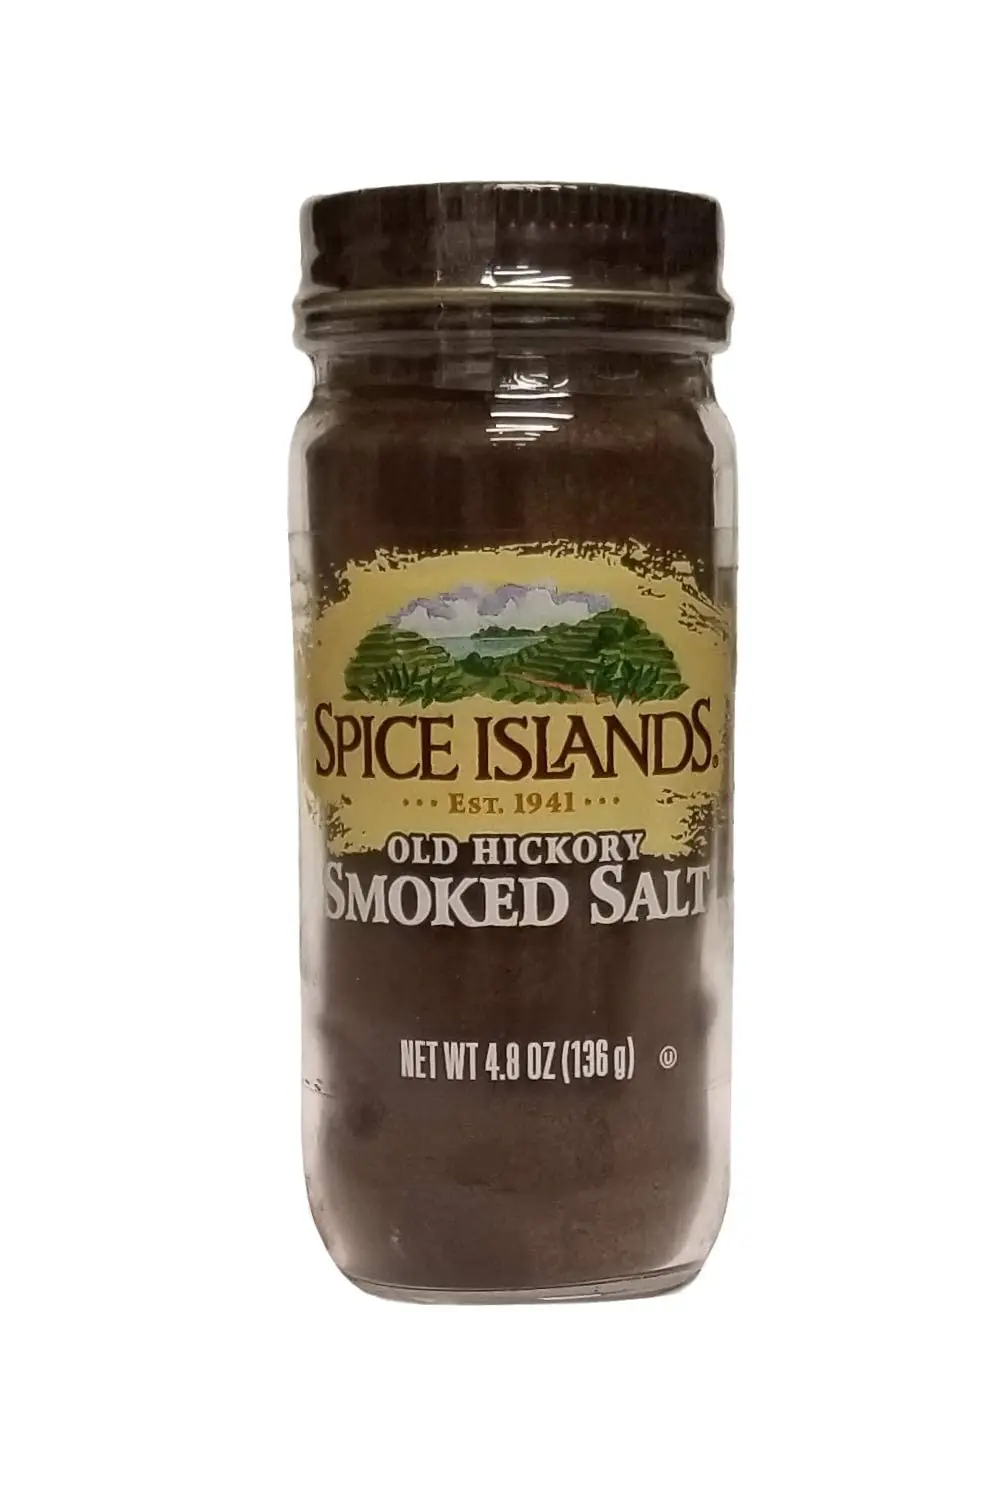 spice island old hickory smoked salt - What is hickory smoked salt used for